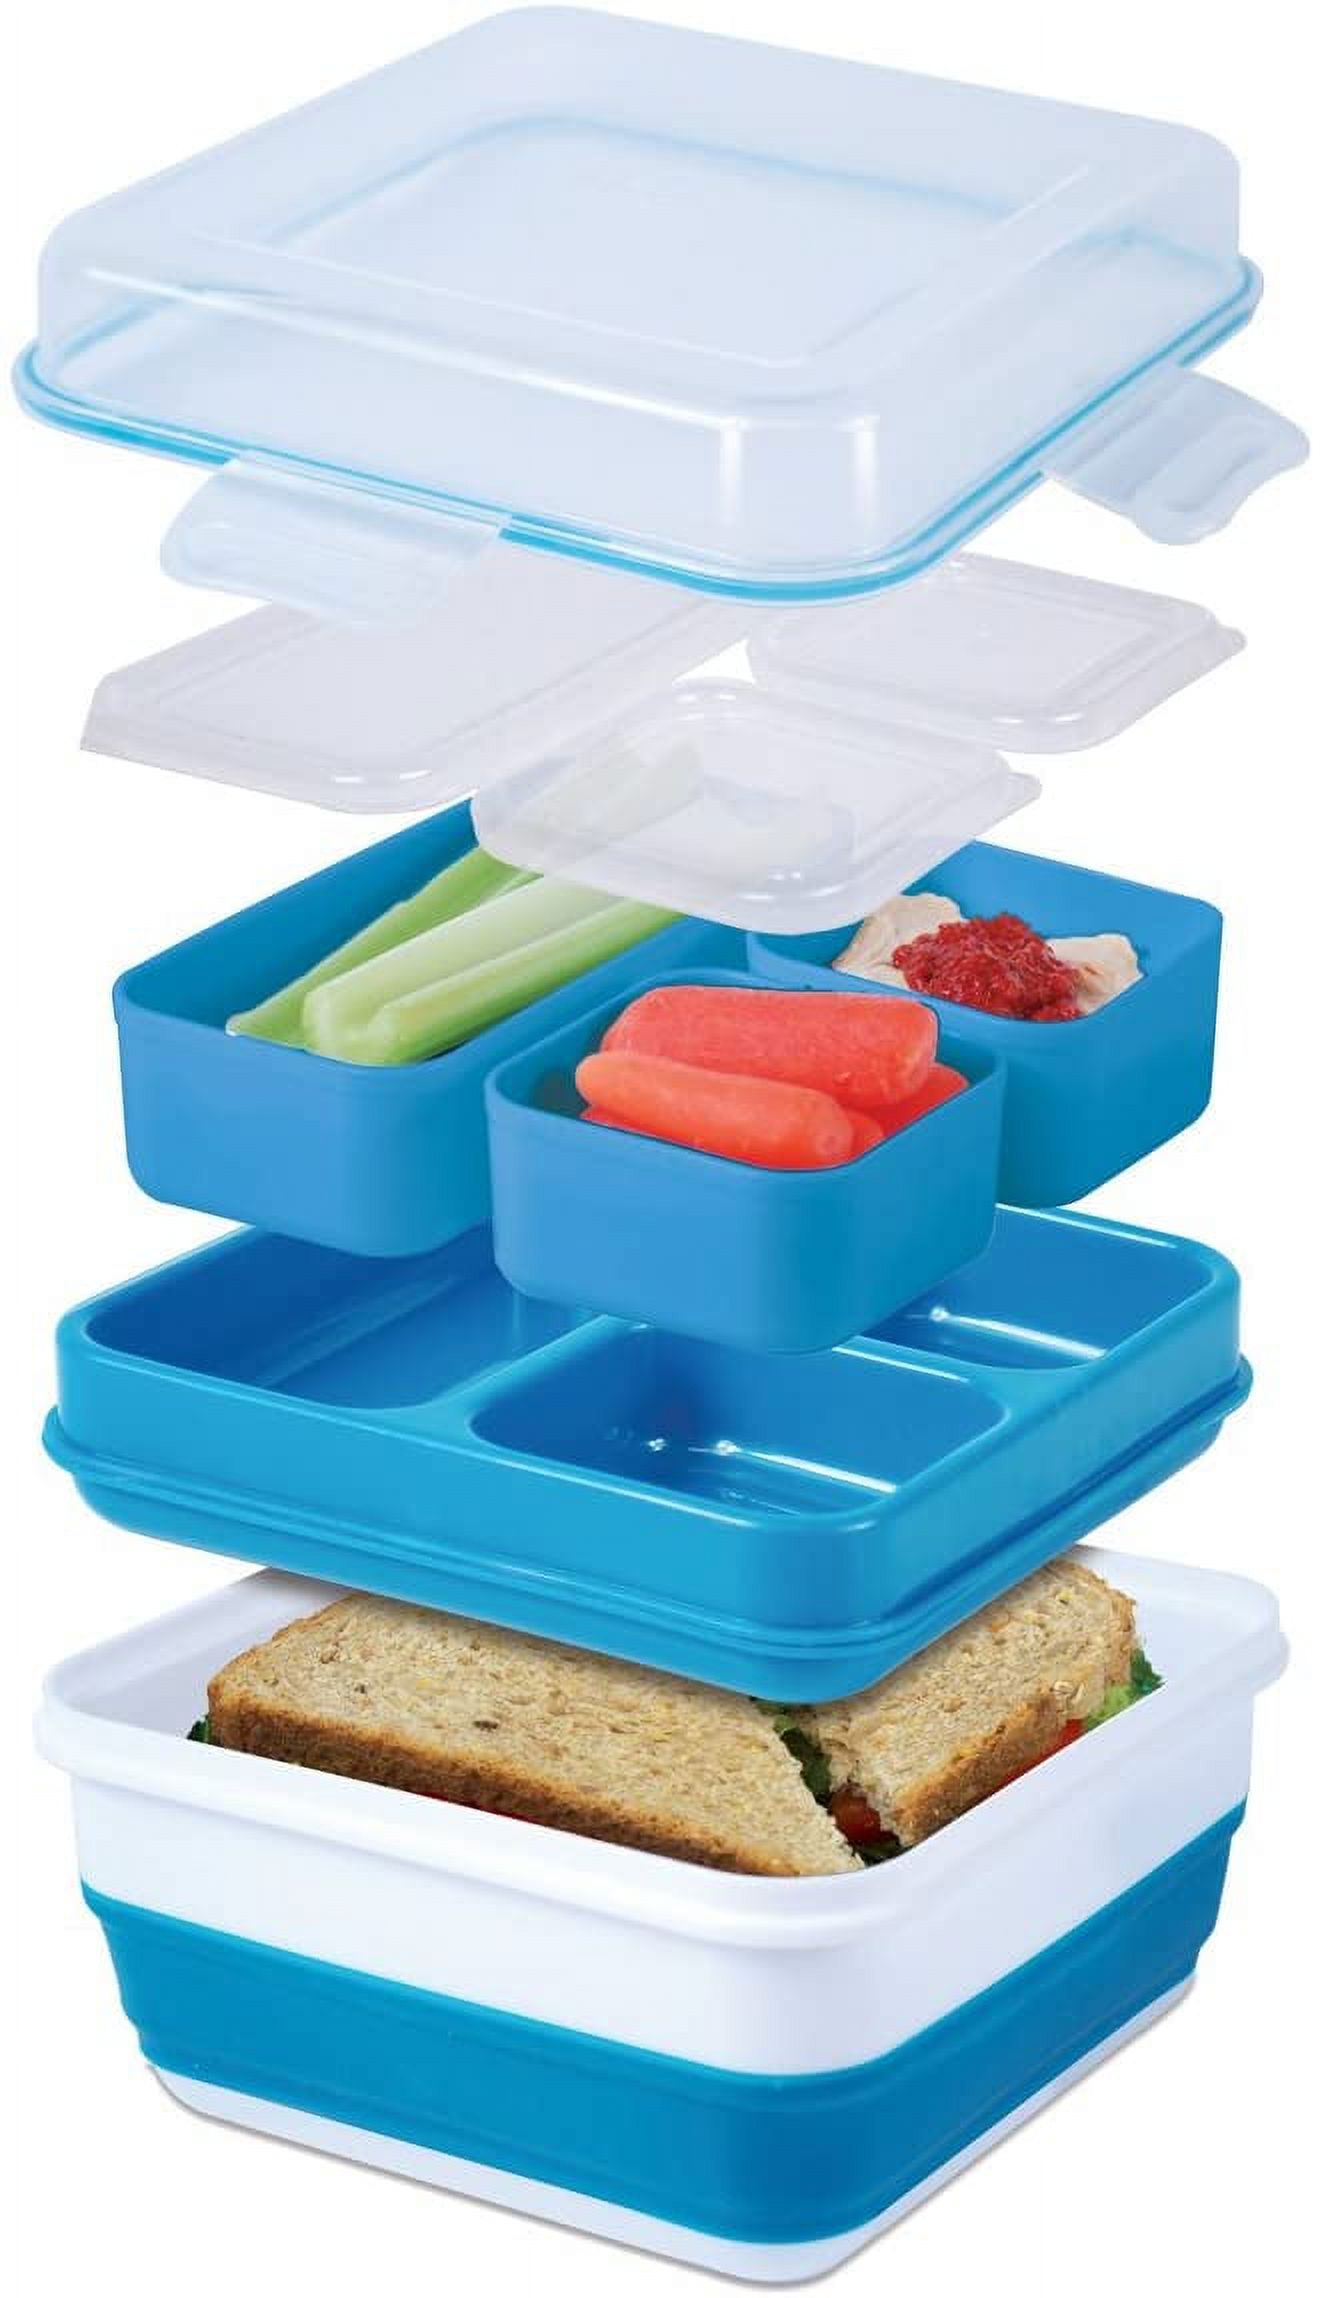 Cool Gear Expandable Bento Lunch Box - image 2 of 2